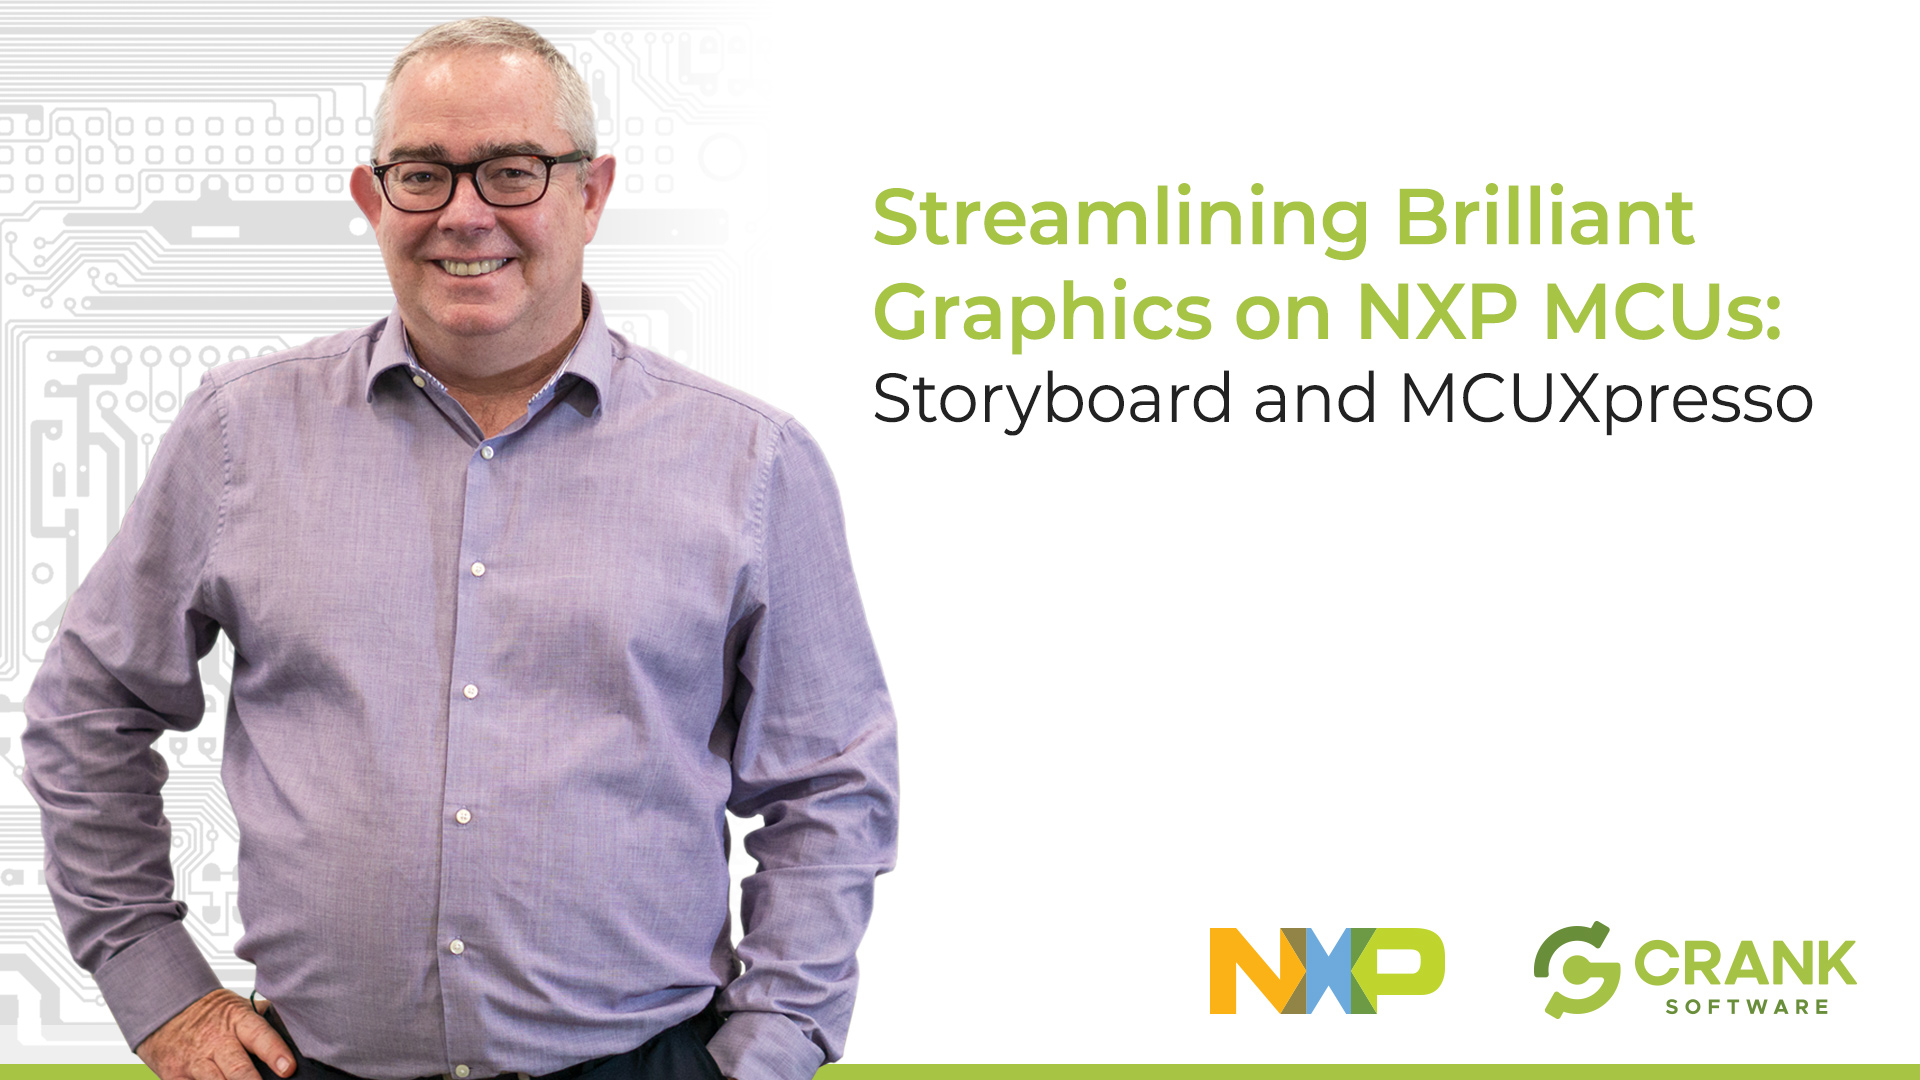 Streamlining_Brilliant_Graphics_on_NXP_MCUs___Storyboard_and_MCUXpresso